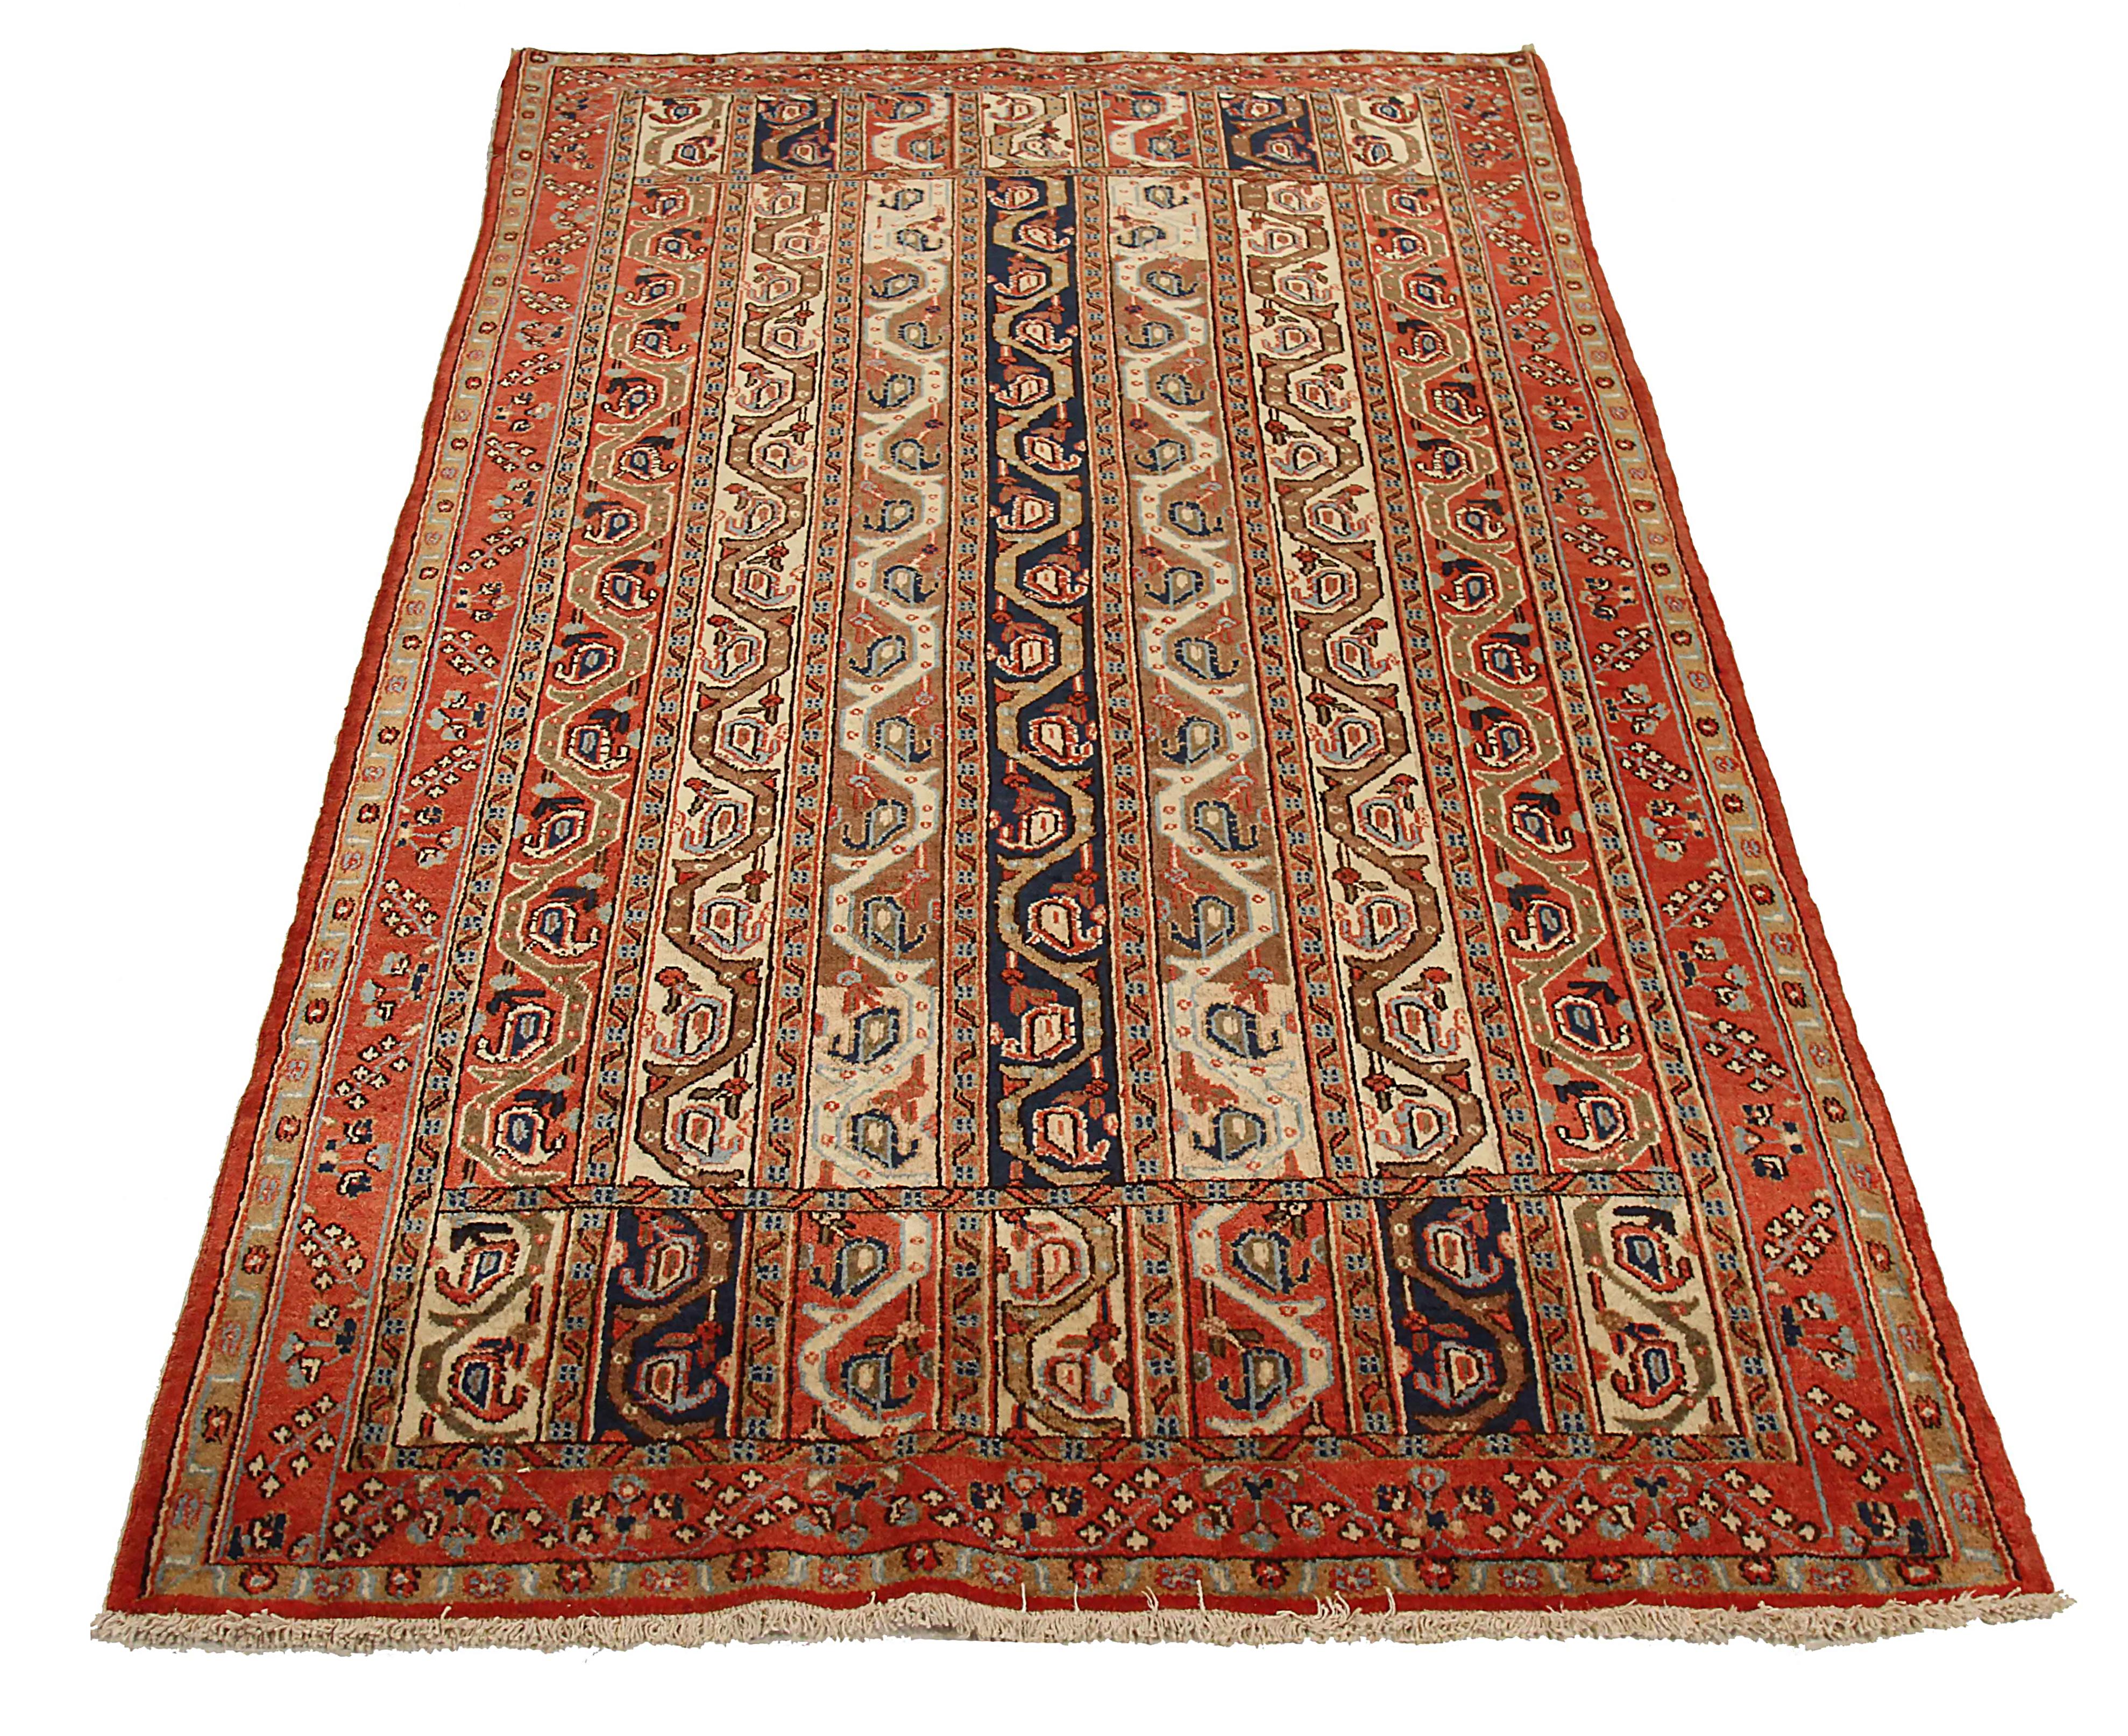 Antique Persian area rug handwoven from the finest sheep’s wool. It’s colored with all-natural vegetable dyes that are safe for humans and pets. It’s a traditional Qom design handwoven by expert artisans. It’s a lovely area rug that can be